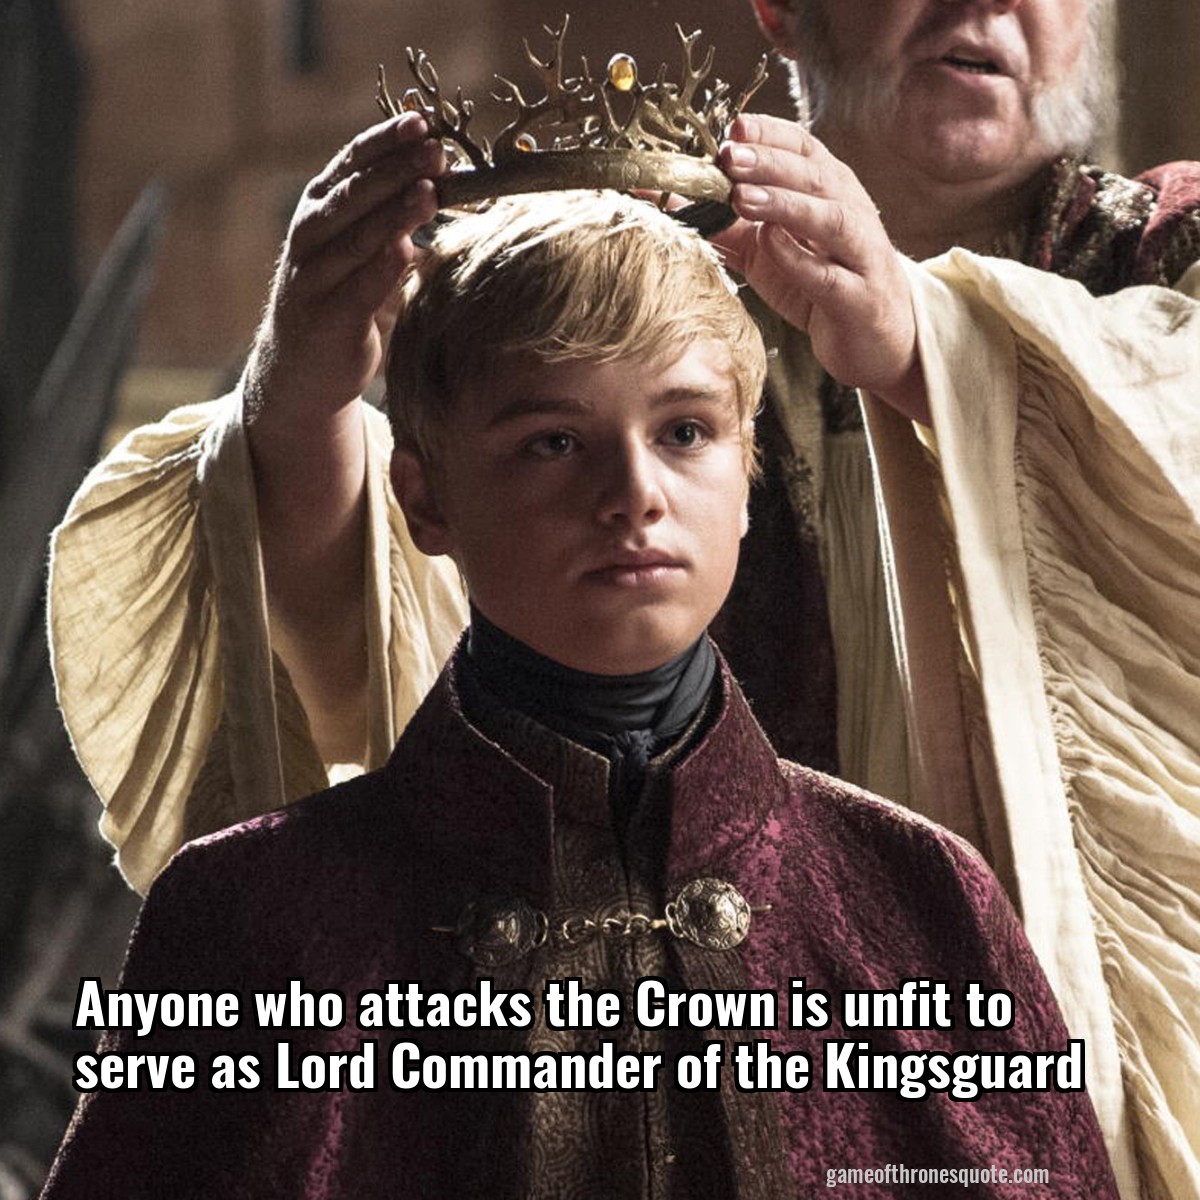 Anyone who attacks the Crown is unfit to serve as Lord Commander of the Kingsguard